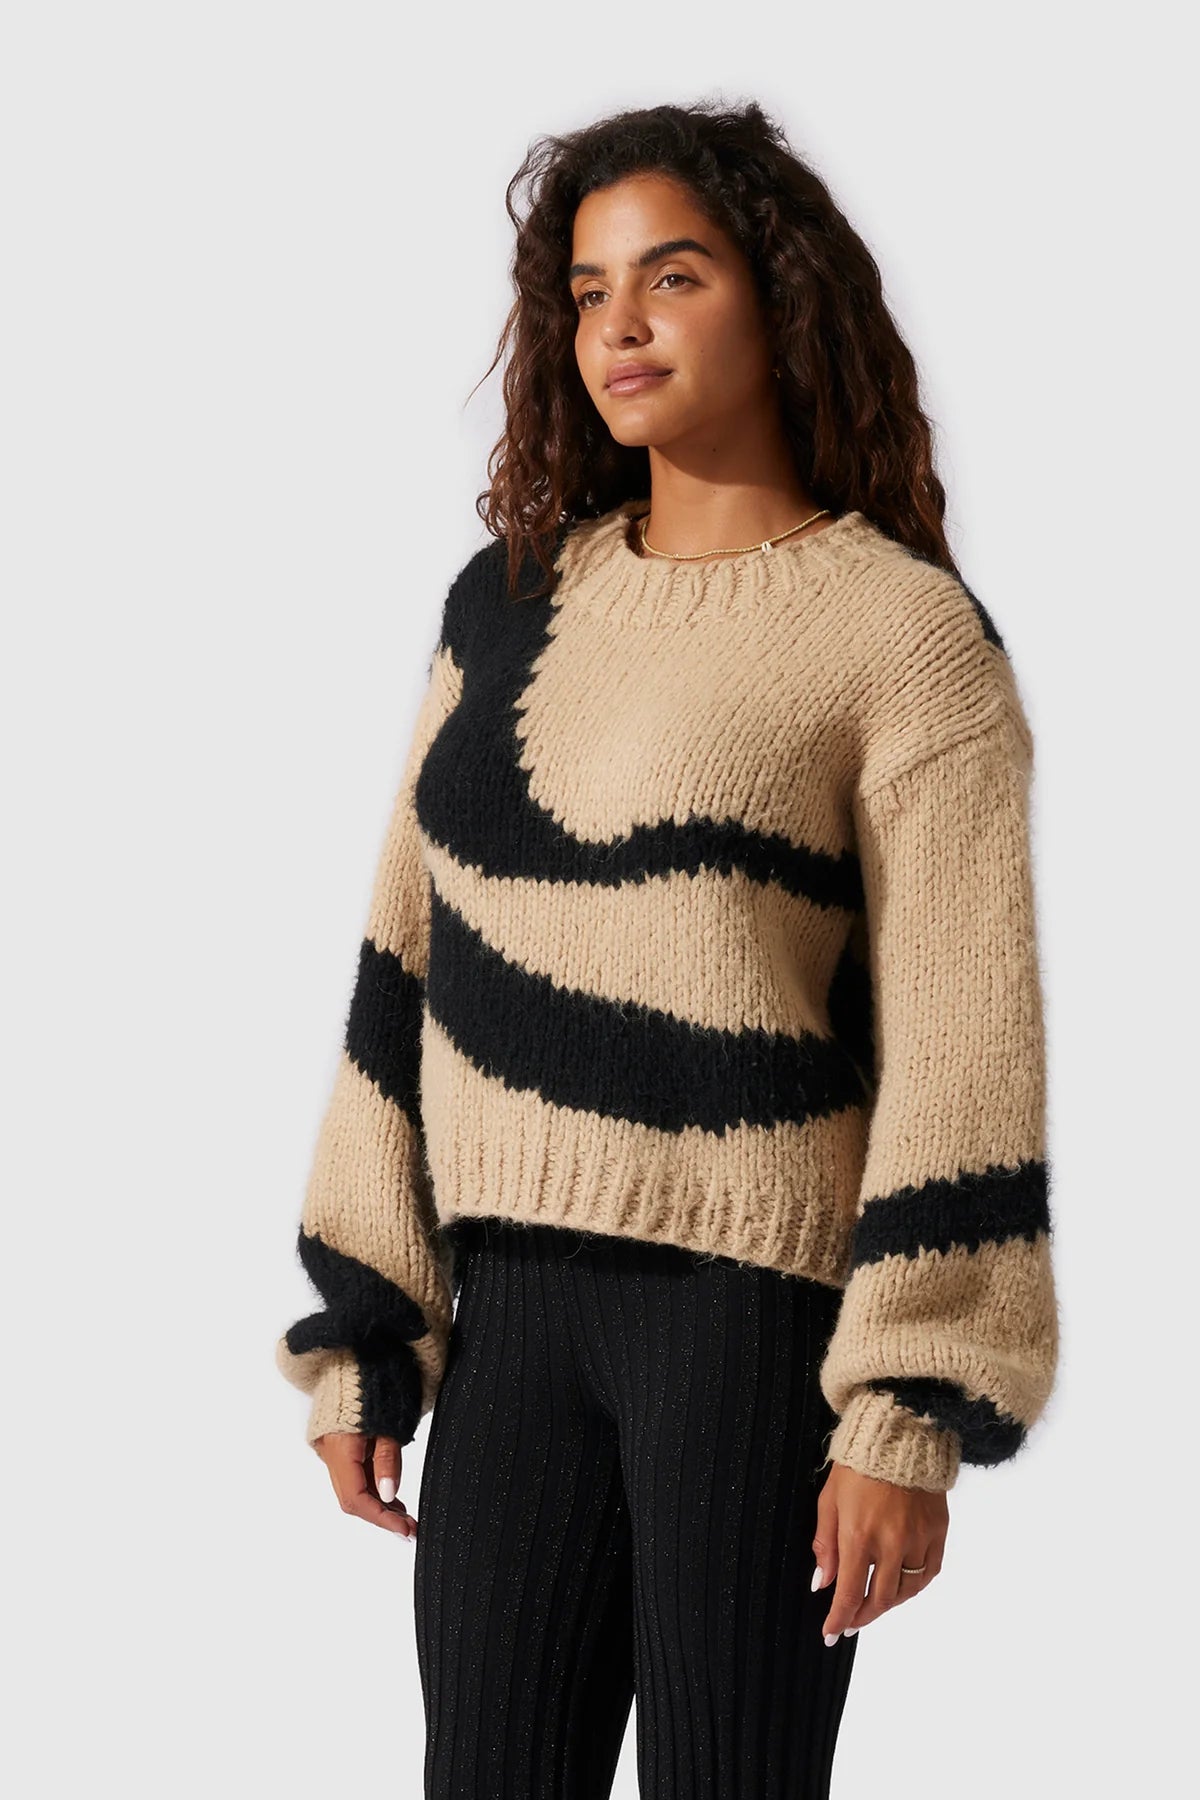 The Wolf Gang Palermo Knitted Jumper - Black Wave